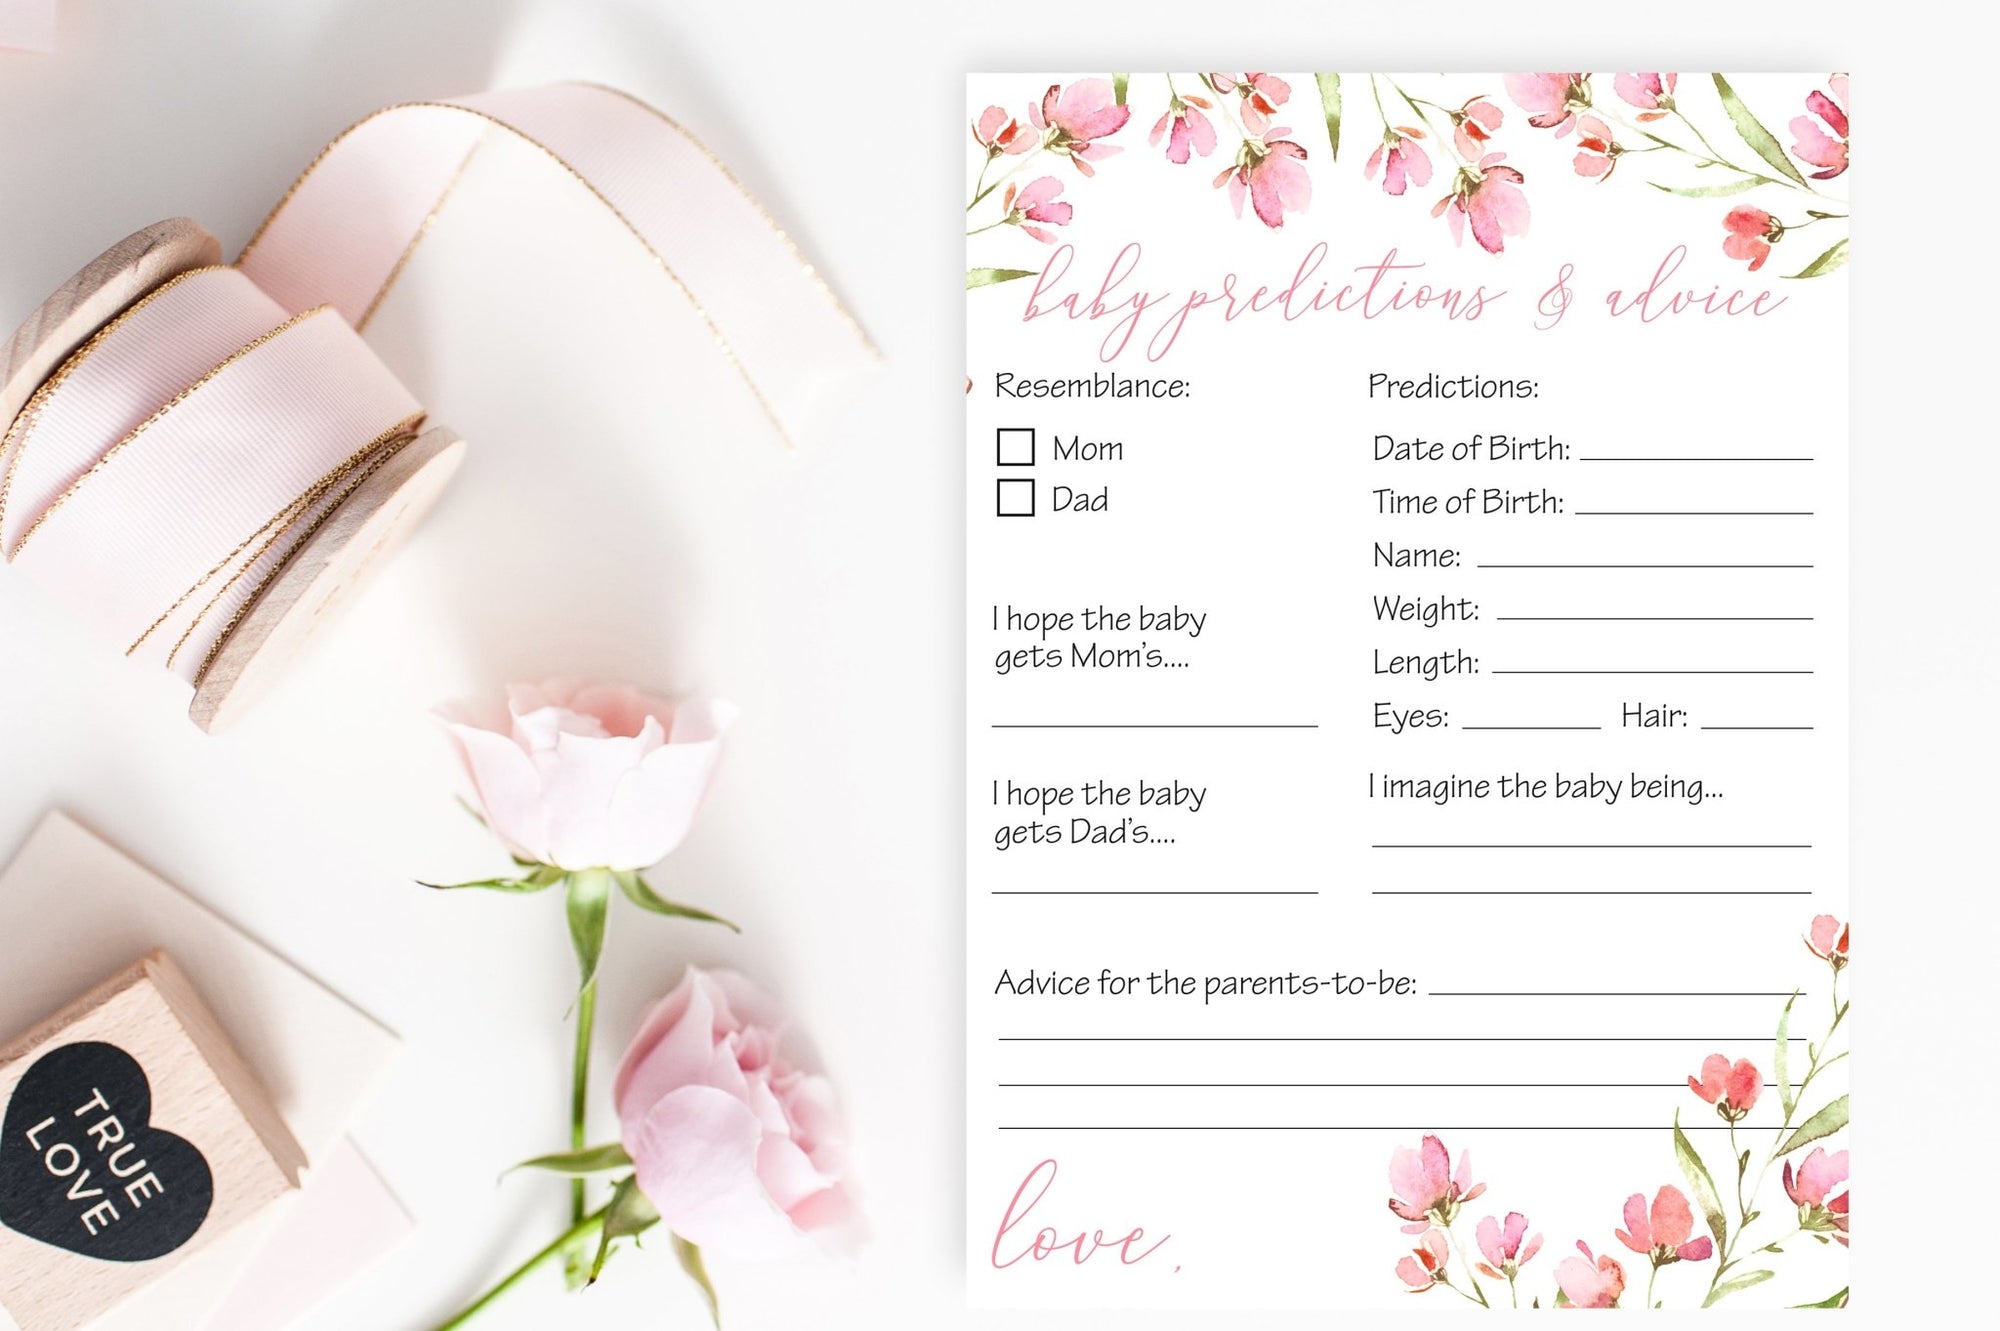 Baby Predictions and Advice - Spring Floral Printable - Pretty Collected